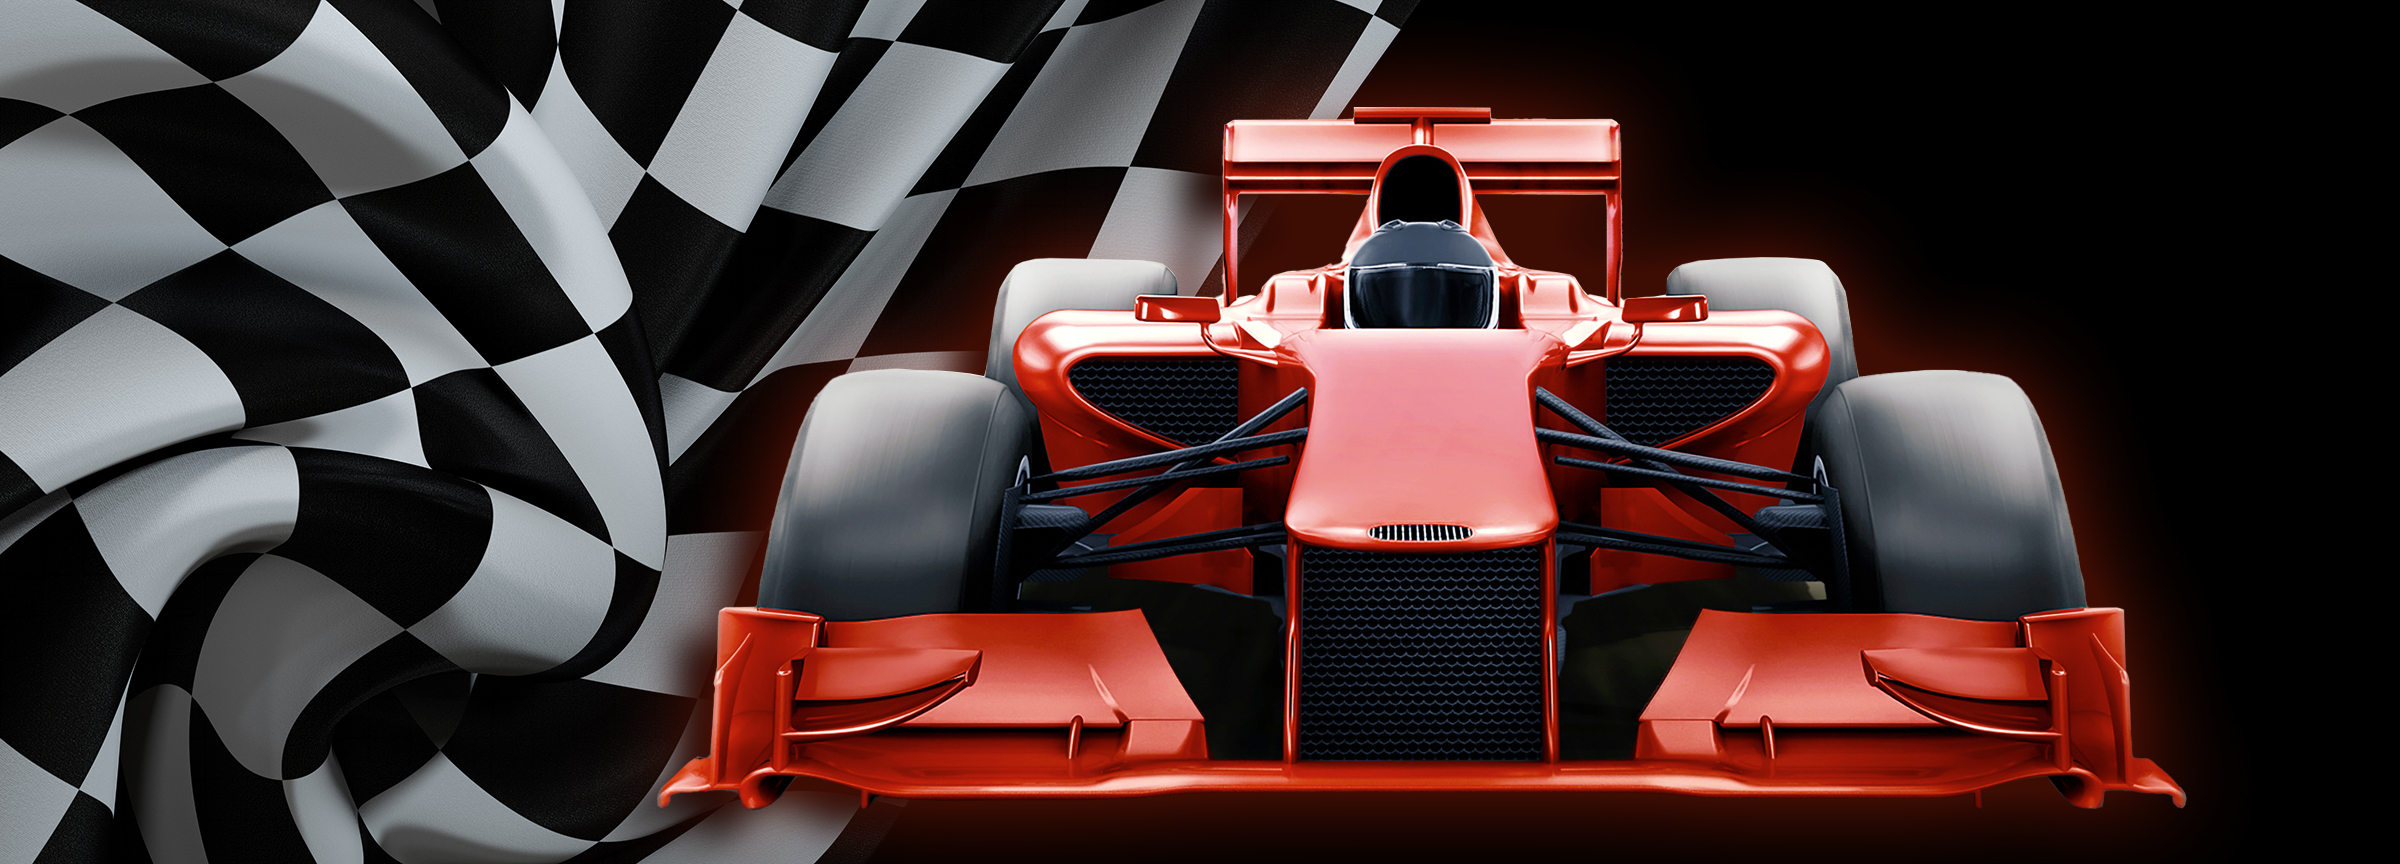 We hit the tarmac with a preview of Formula 1, taking a look at the top contenders so far. Who will you back?